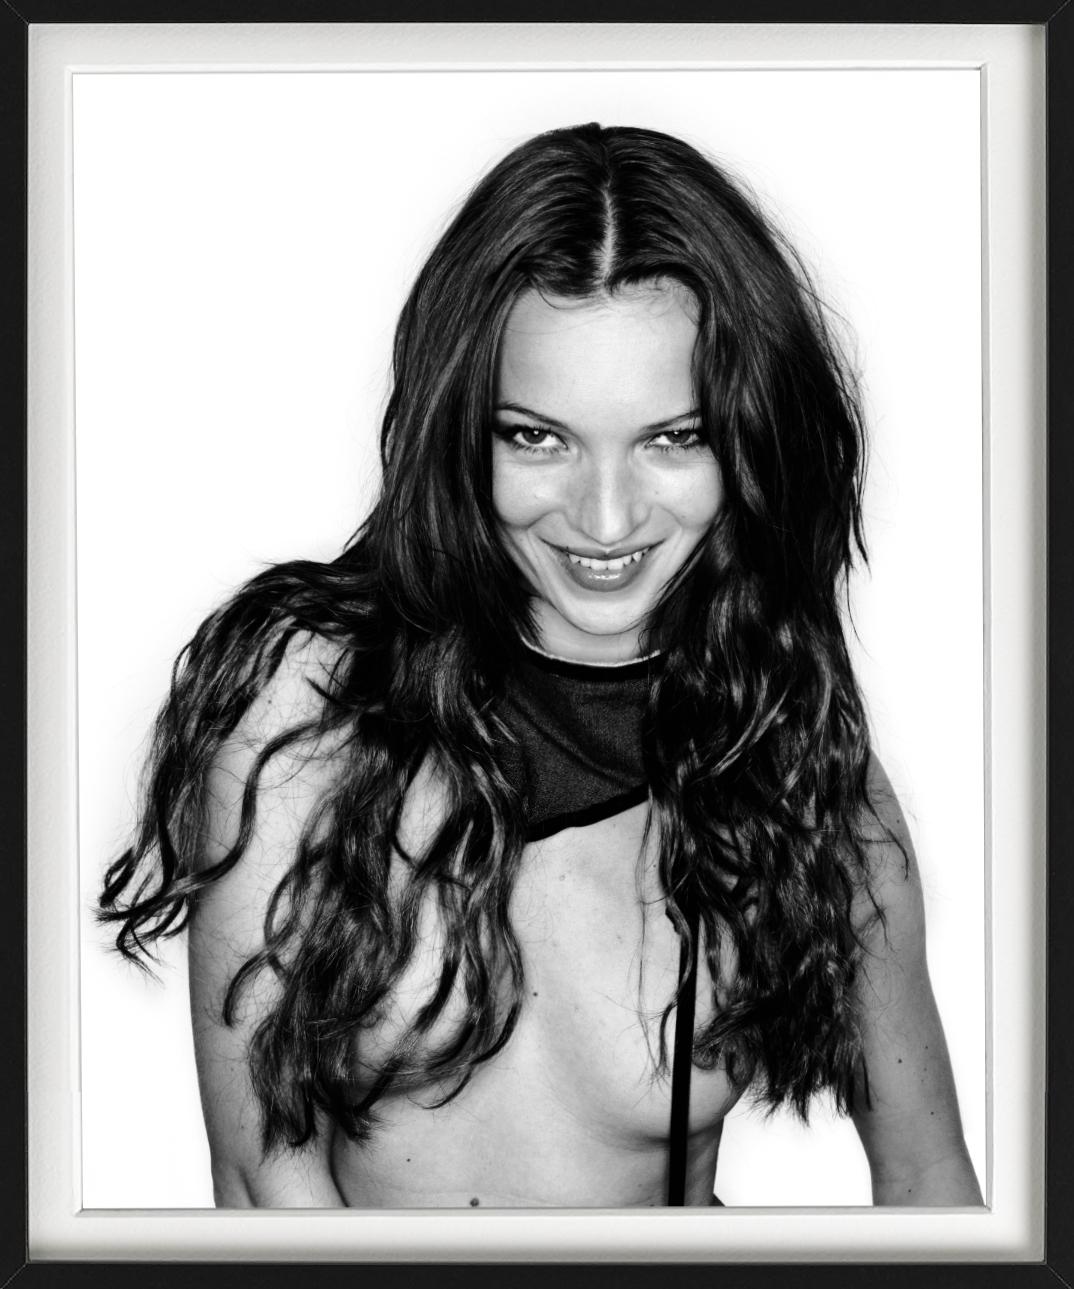 Cheeky Kate - nude portrait of supermodel Kate Moss, fine art photography, 1999 For Sale 2